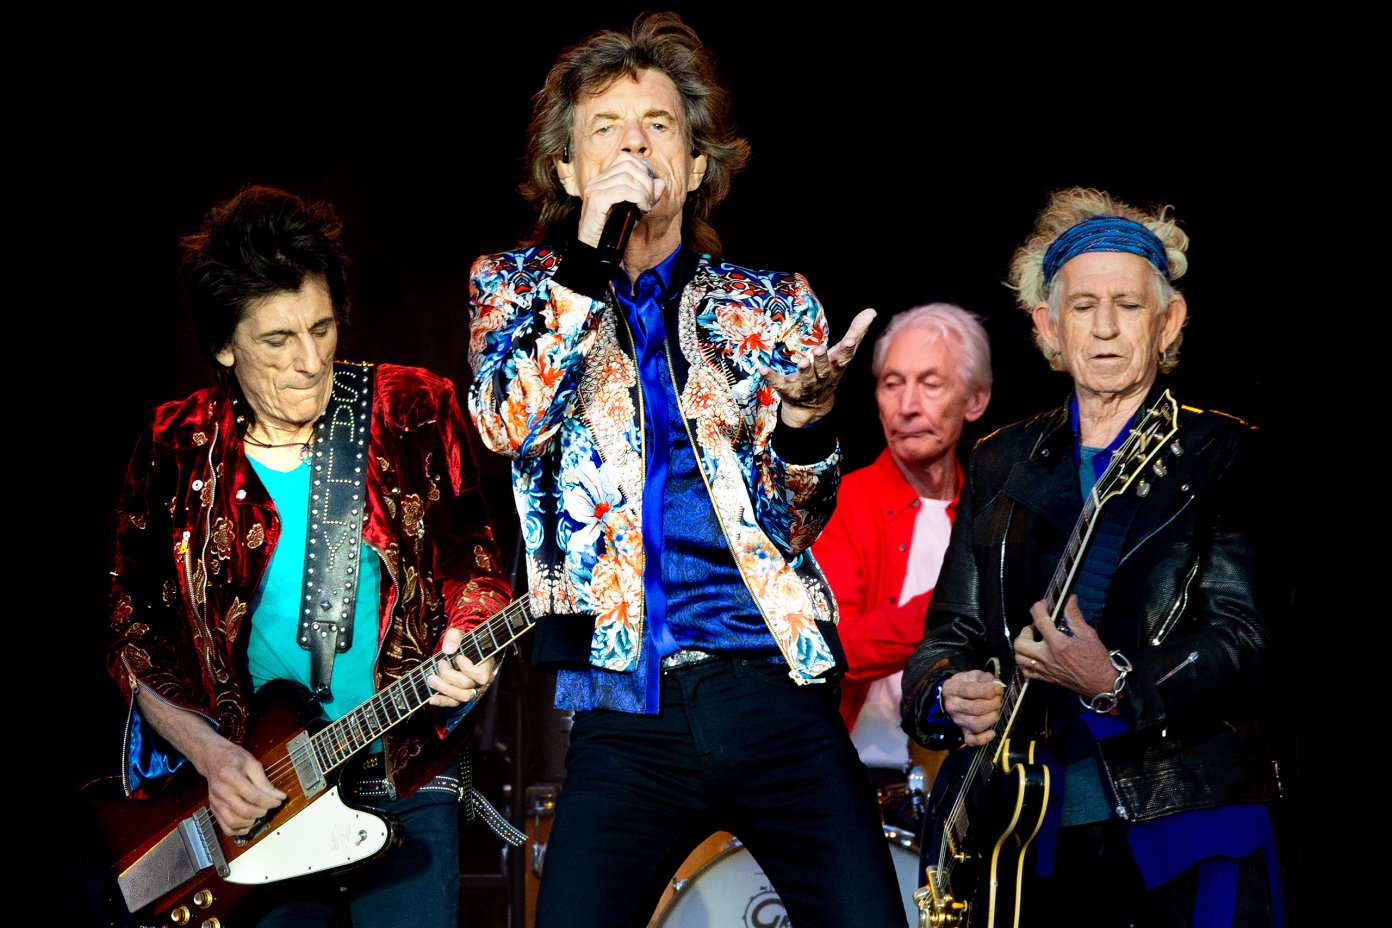 The Rolling Stones’ 20 greatest guitar moments, ranked